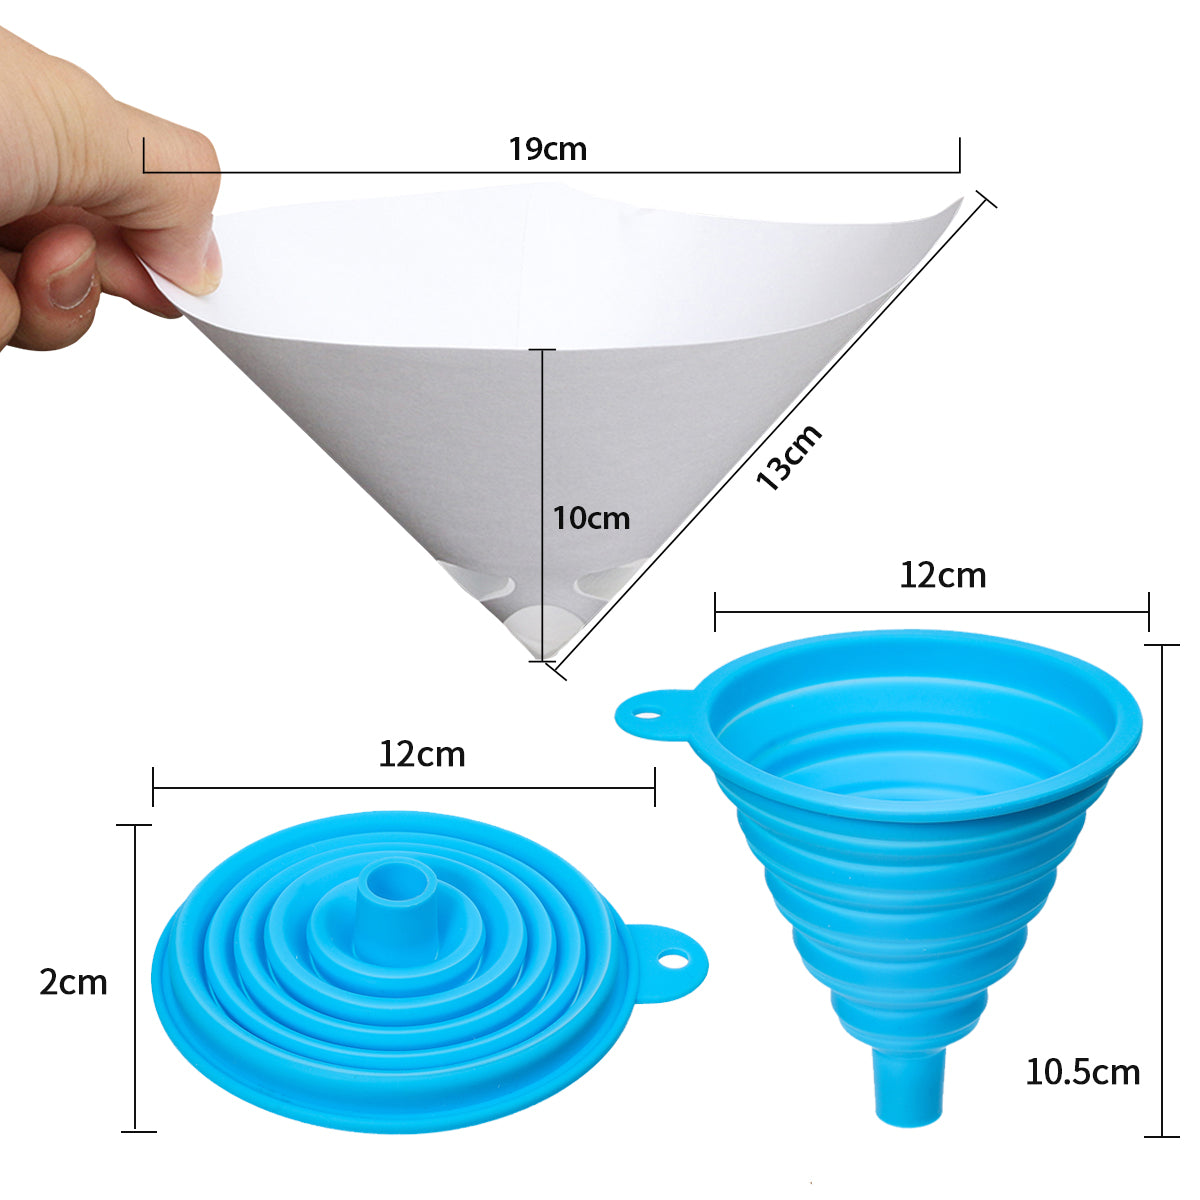 Resin funnel and filters